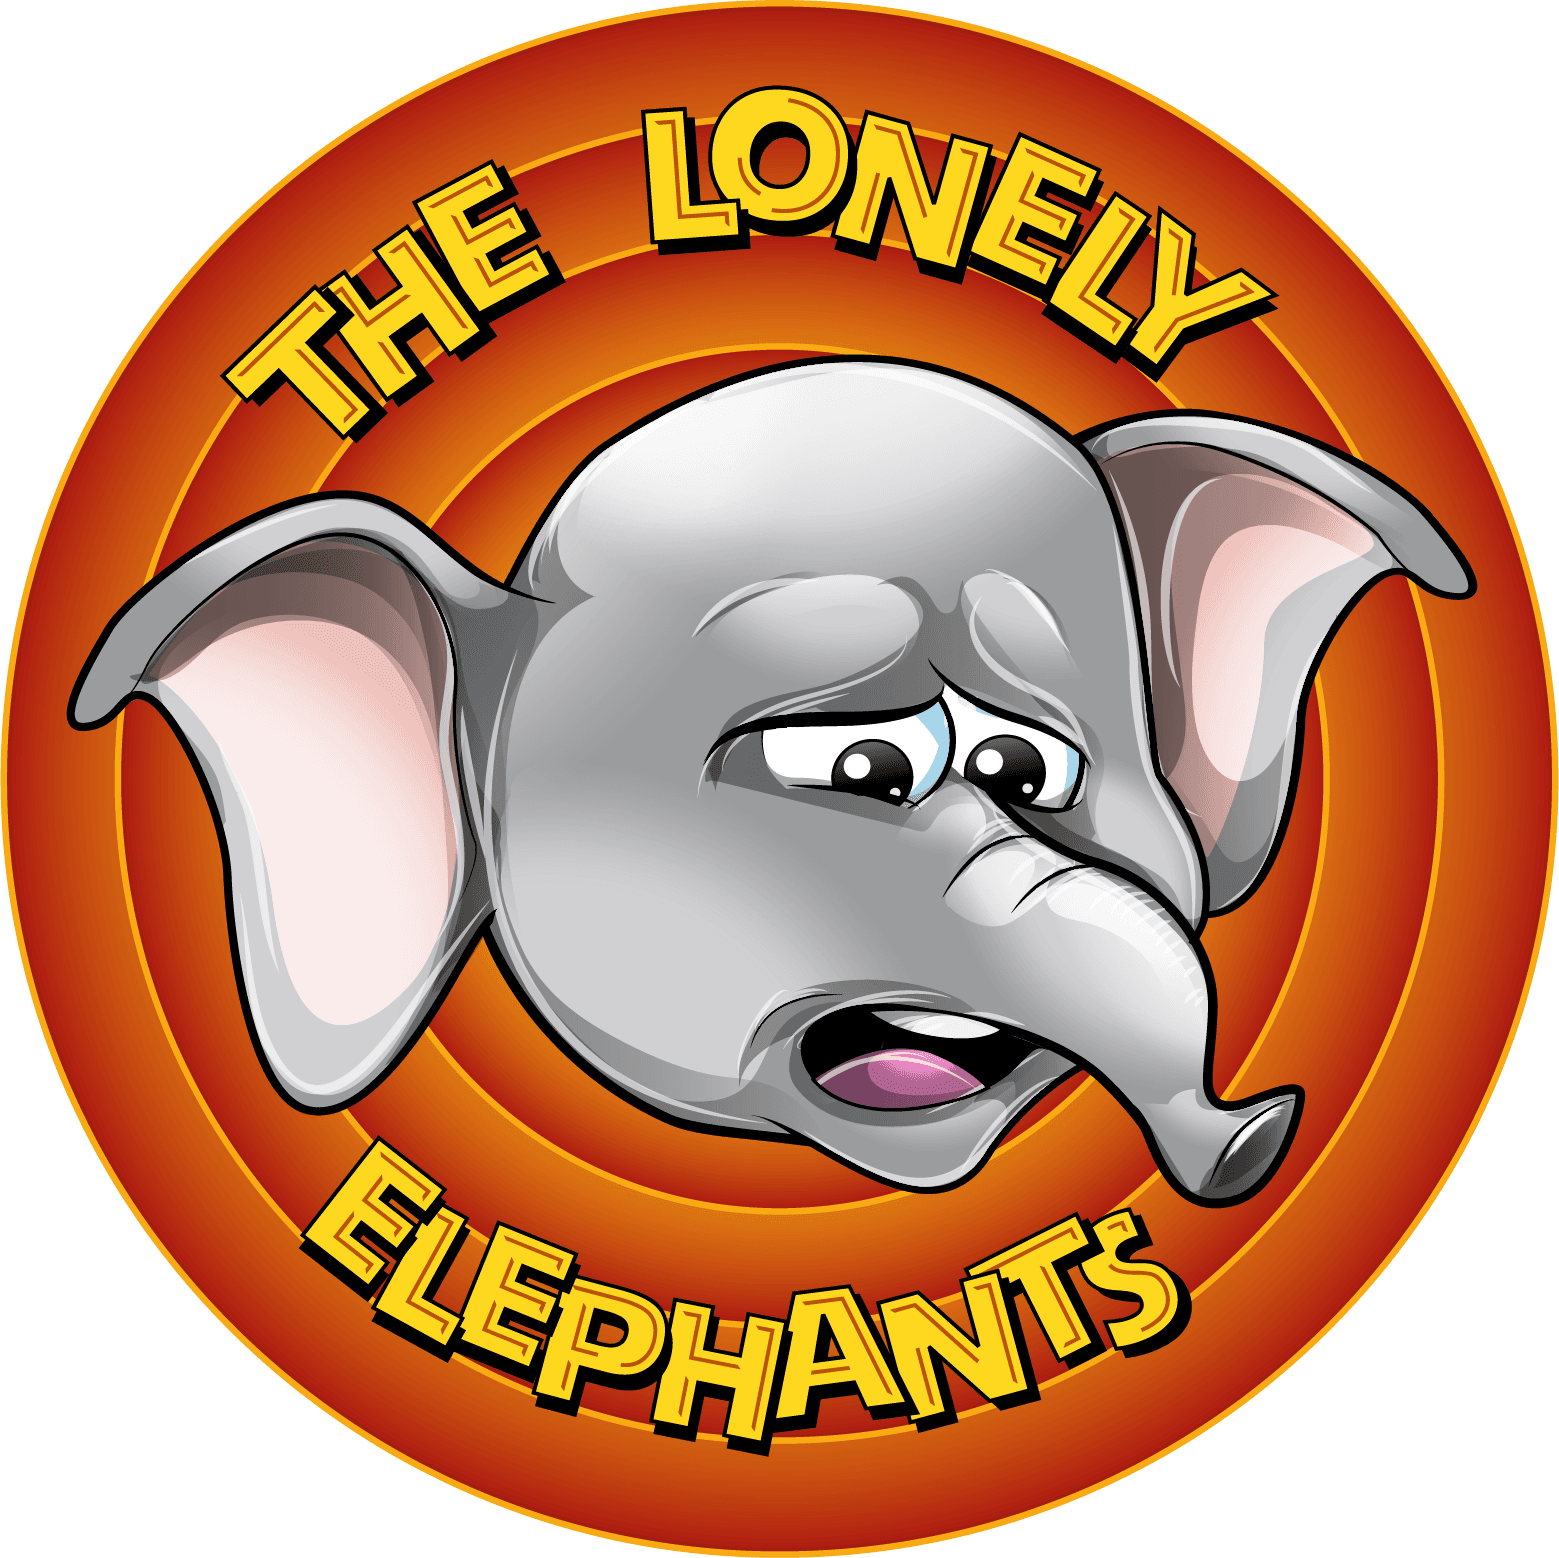 THE LONELY ELEPHANTS